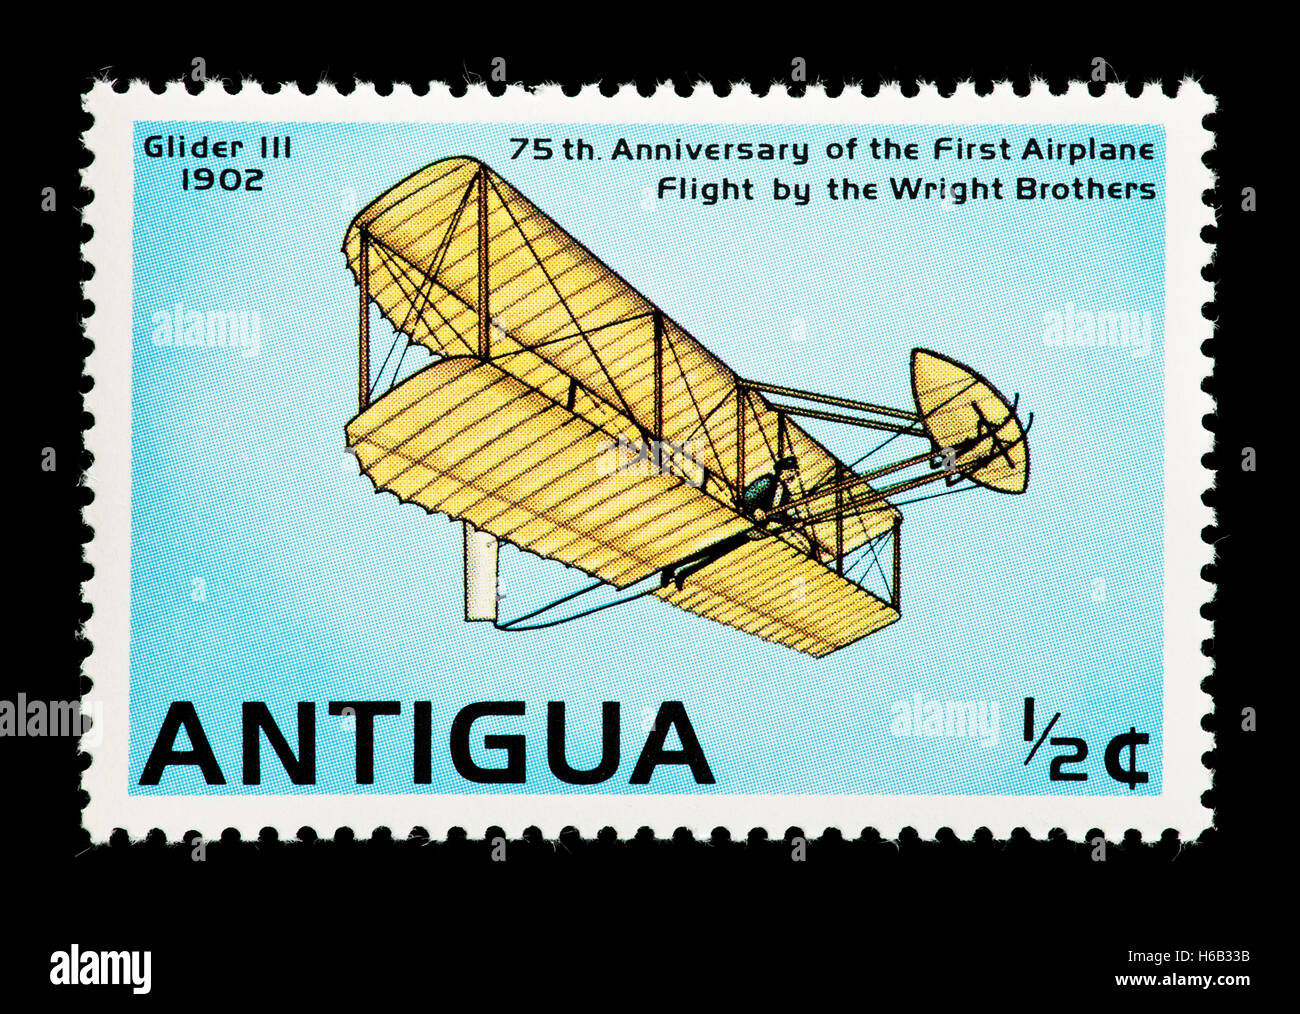 Postage stamp from Antigua depicting a Wright Brothers glider aircraft, 75'th anniversary of the Wright Brothers first flight. Stock Photo